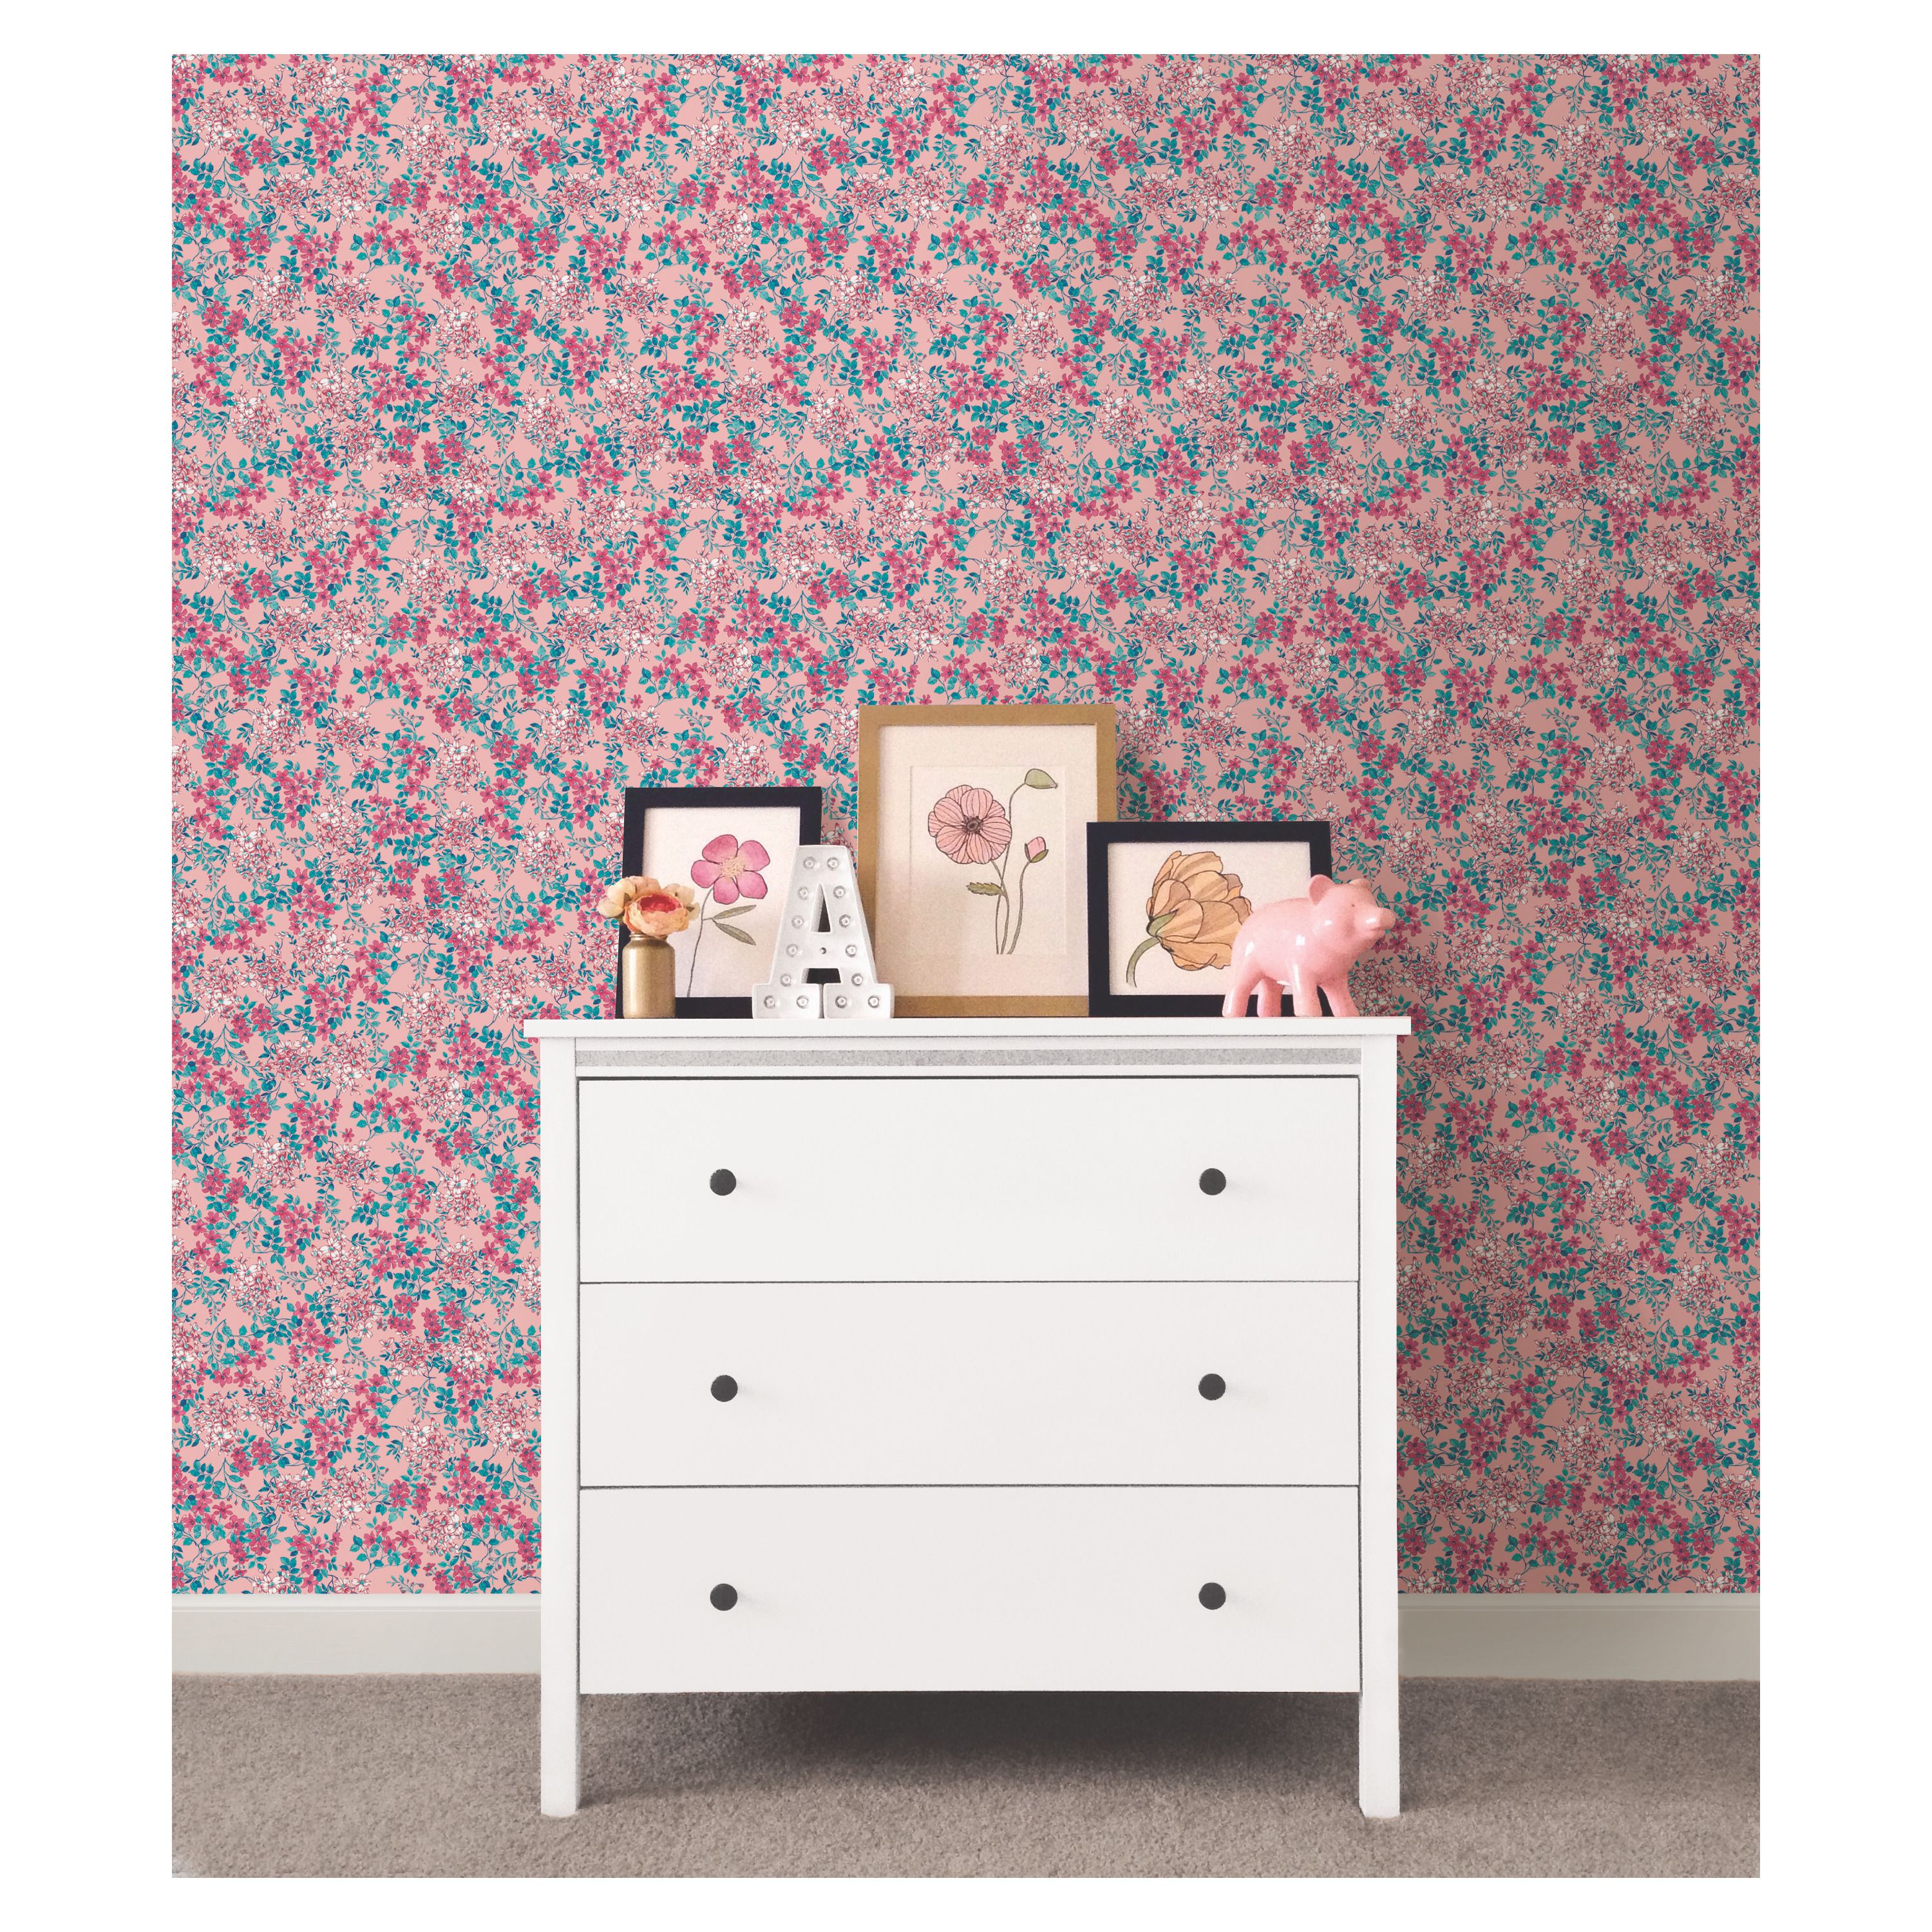 Pioneer Woman has a peel and stick wallpaper line